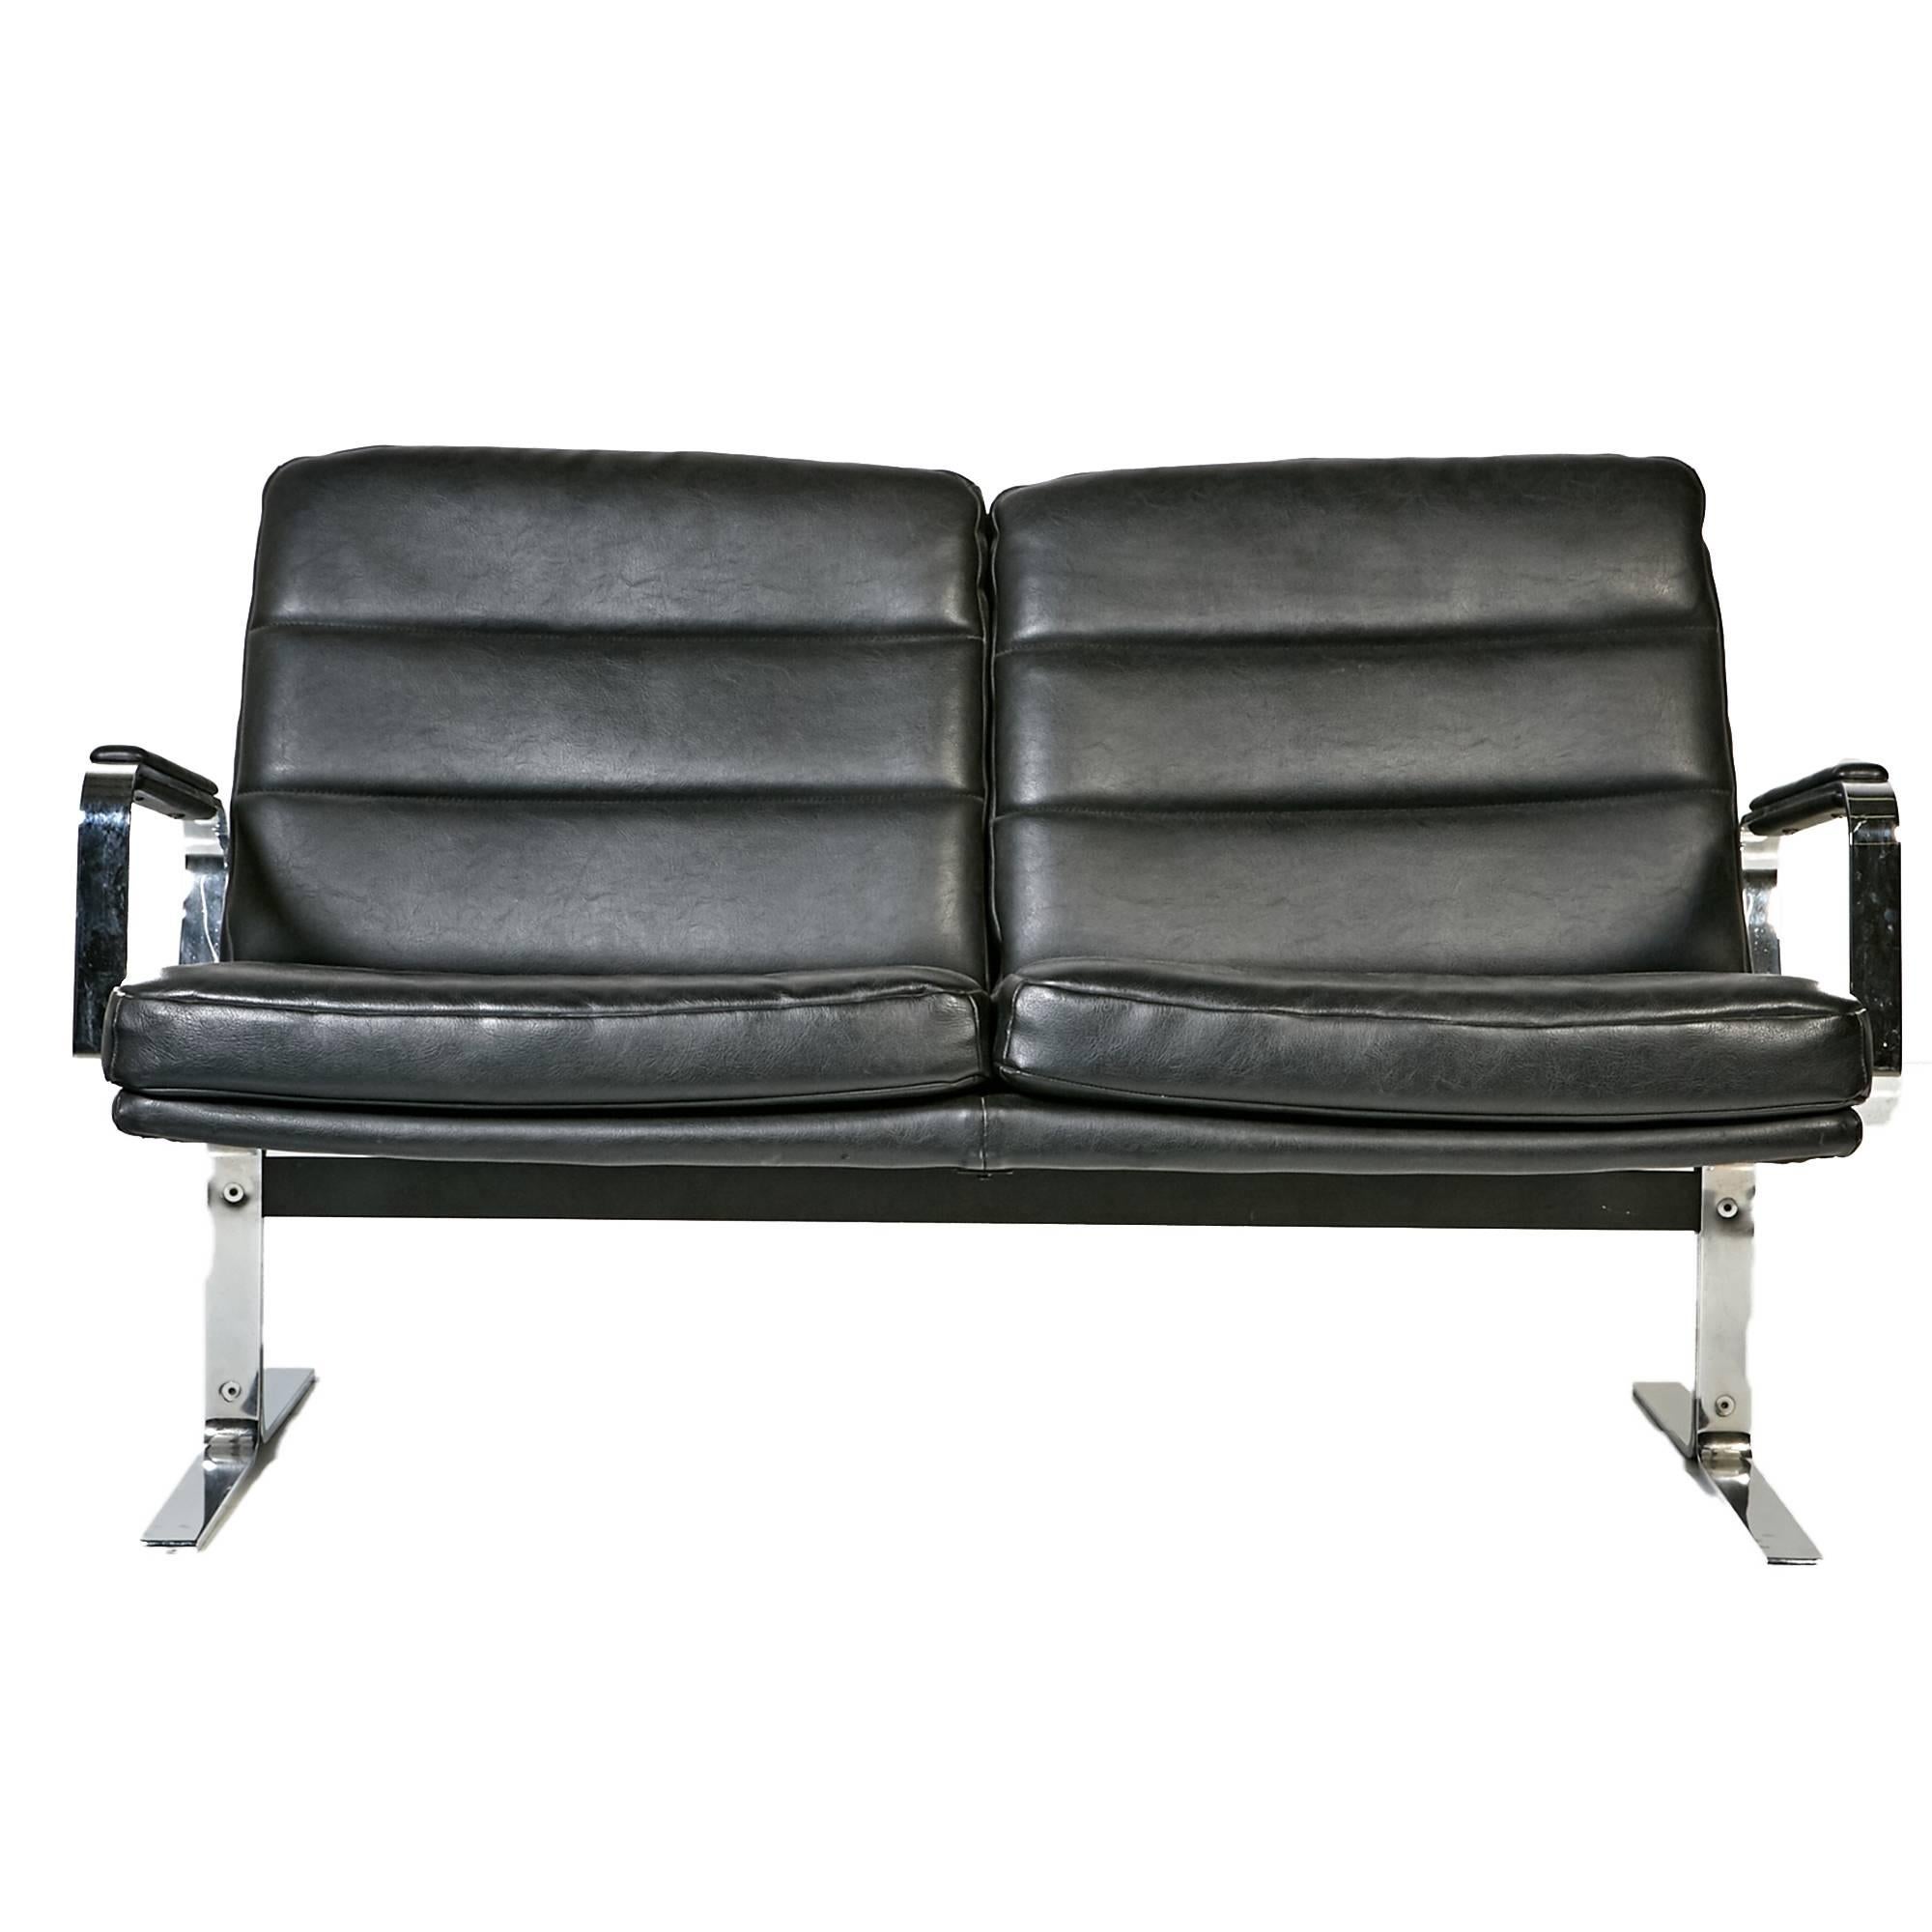 Mid-Century Modern 1970s Airport-Style Living Room Set by Bernd Münzebrock for Knoll For Sale